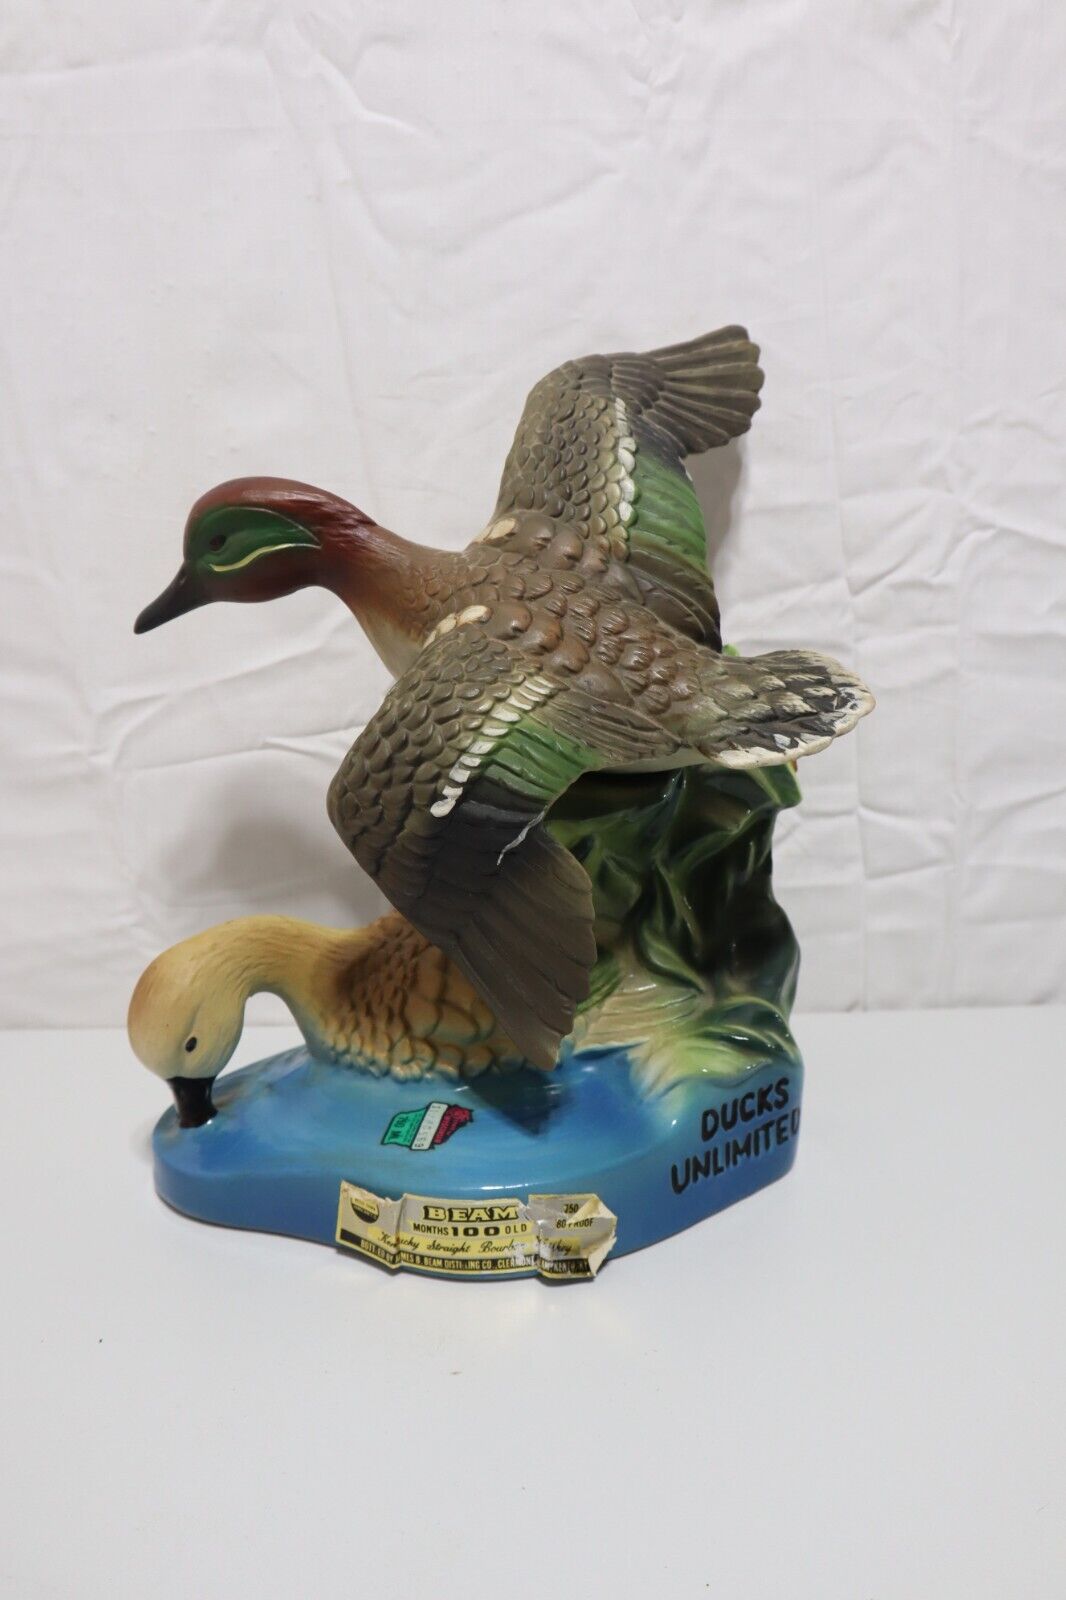 Jim Beam Ducks Unlimited, Green Winged Teal Whiskey Decanter, 1981